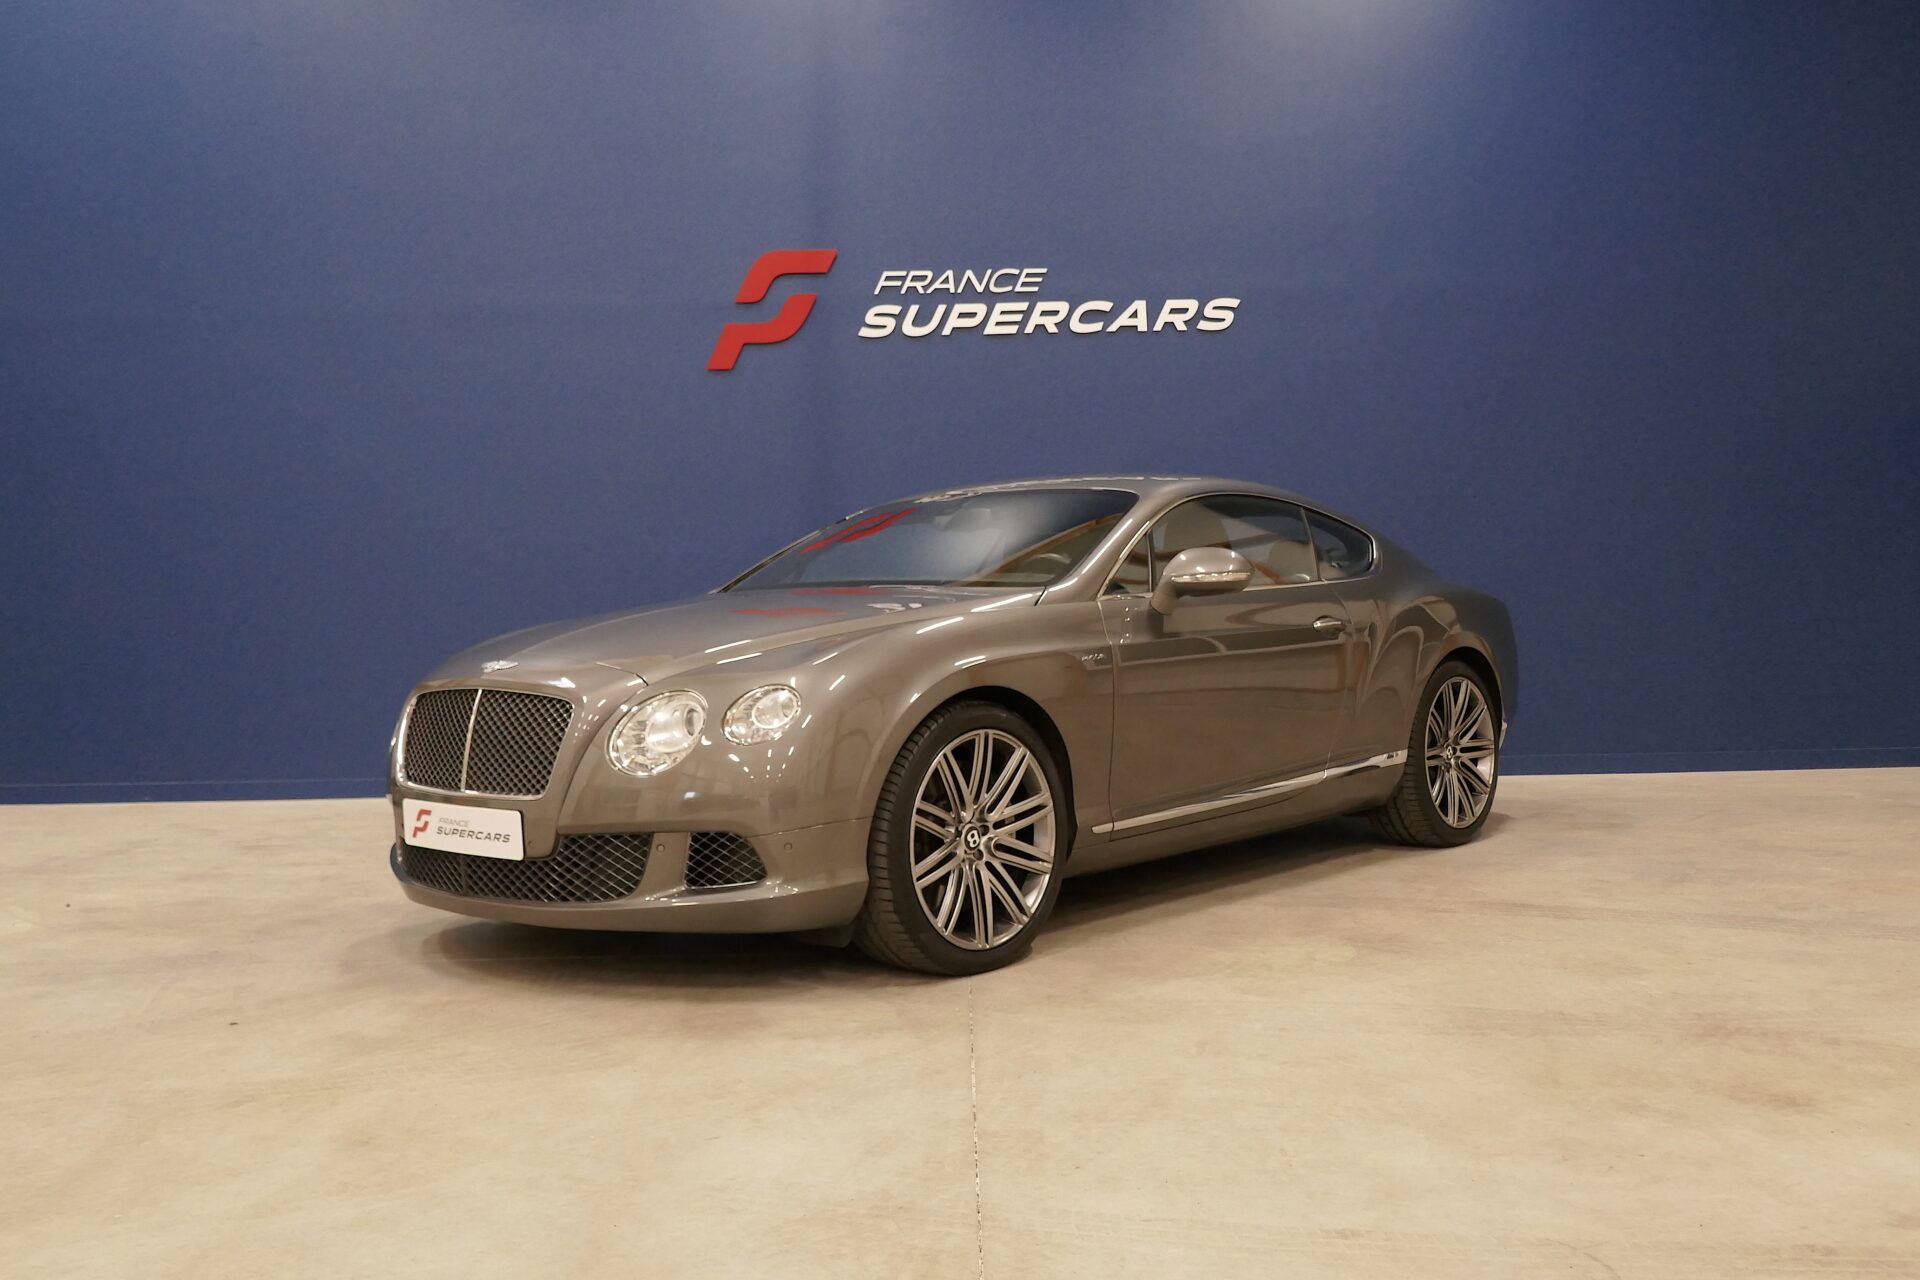 BENTLEY CONTINENTAL GT SPEED 625 II FRANCE SUPERCARS